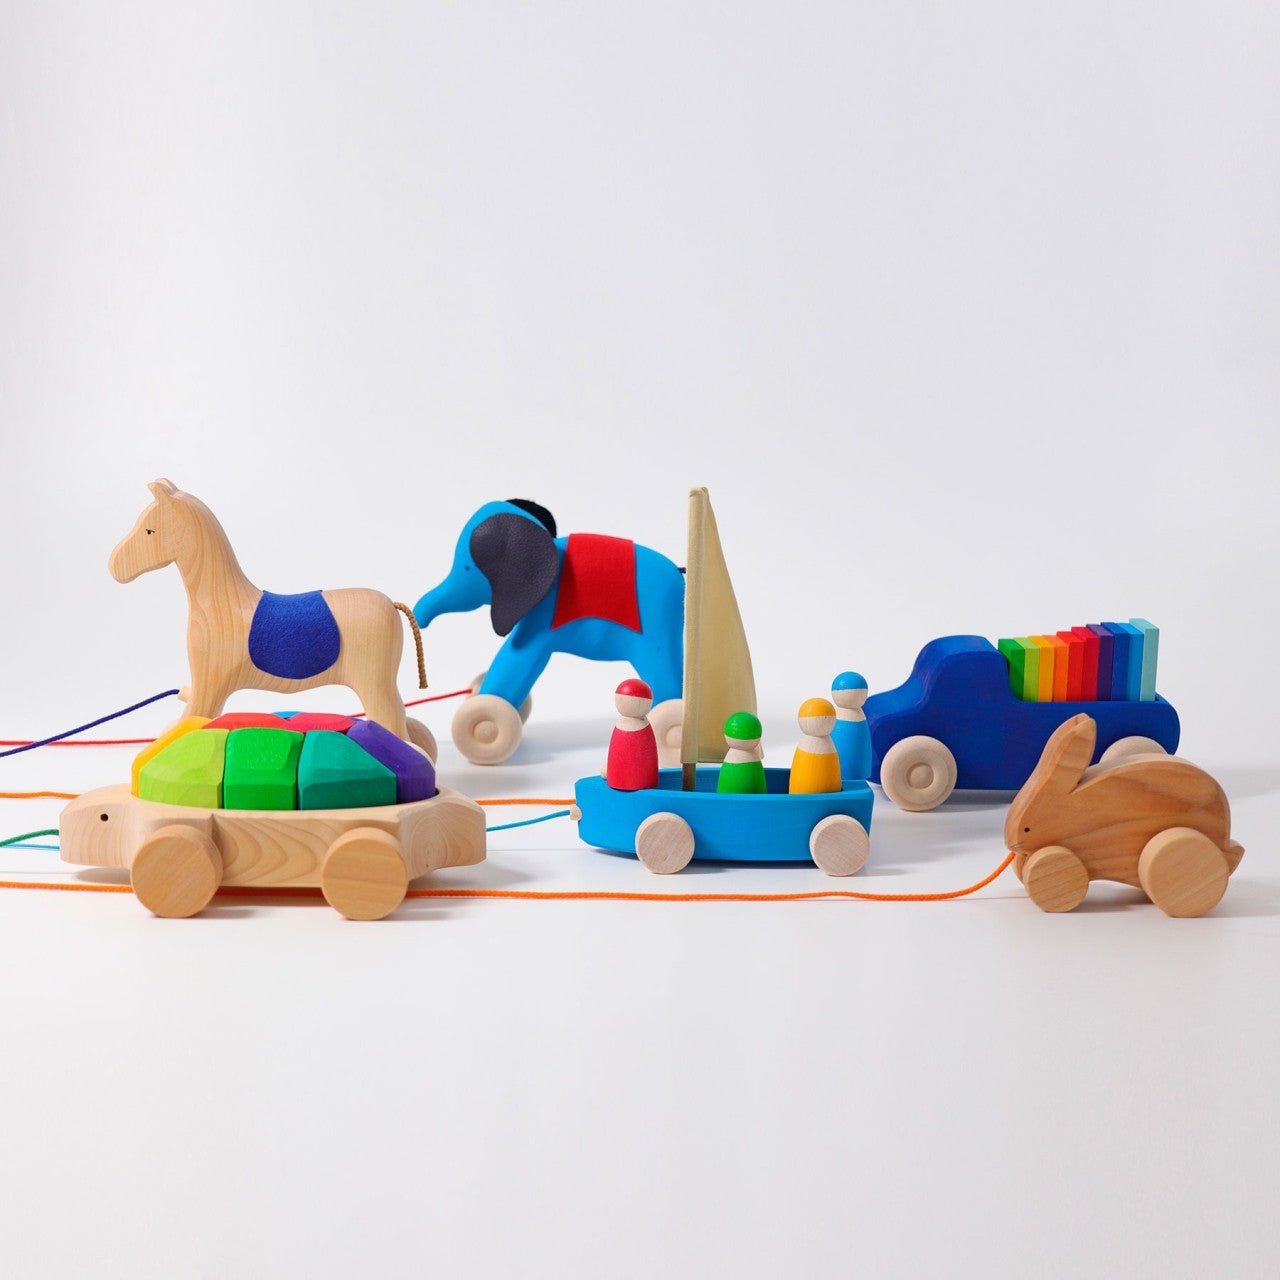 GRIMM'S | PULL ALONG TRUCK by GRIMM'S WOODEN TOYS - The Playful Collective